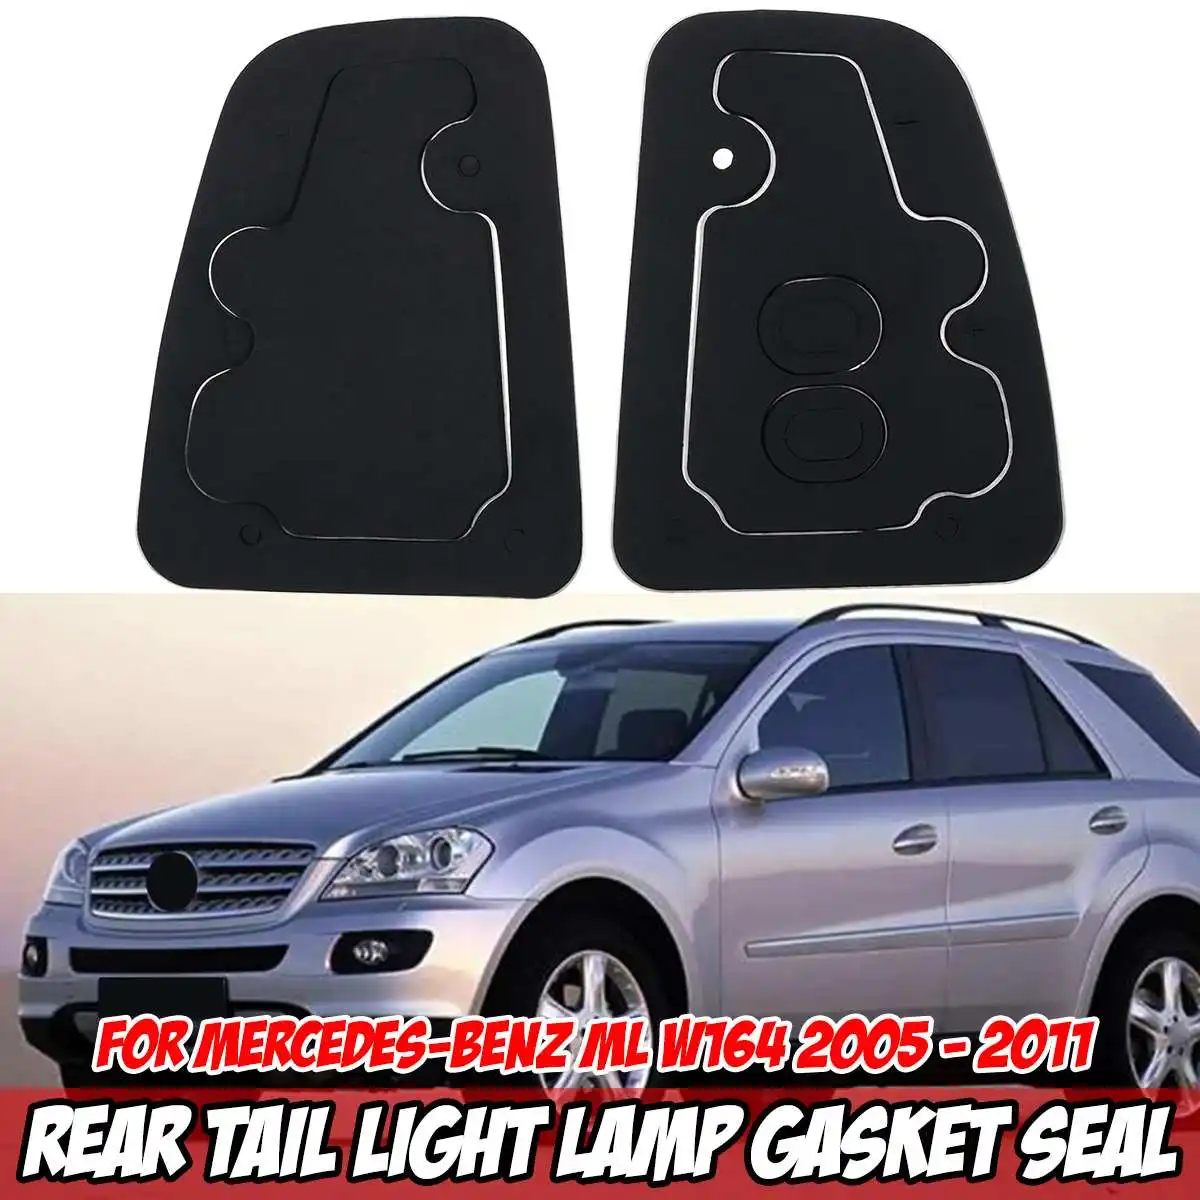 

A Pair Car Rear Tail Brake Light Lamp Gasket Seal Gaskets For Mercedes For Benz ML W164 2005-2011 A1648261691 A1648261591